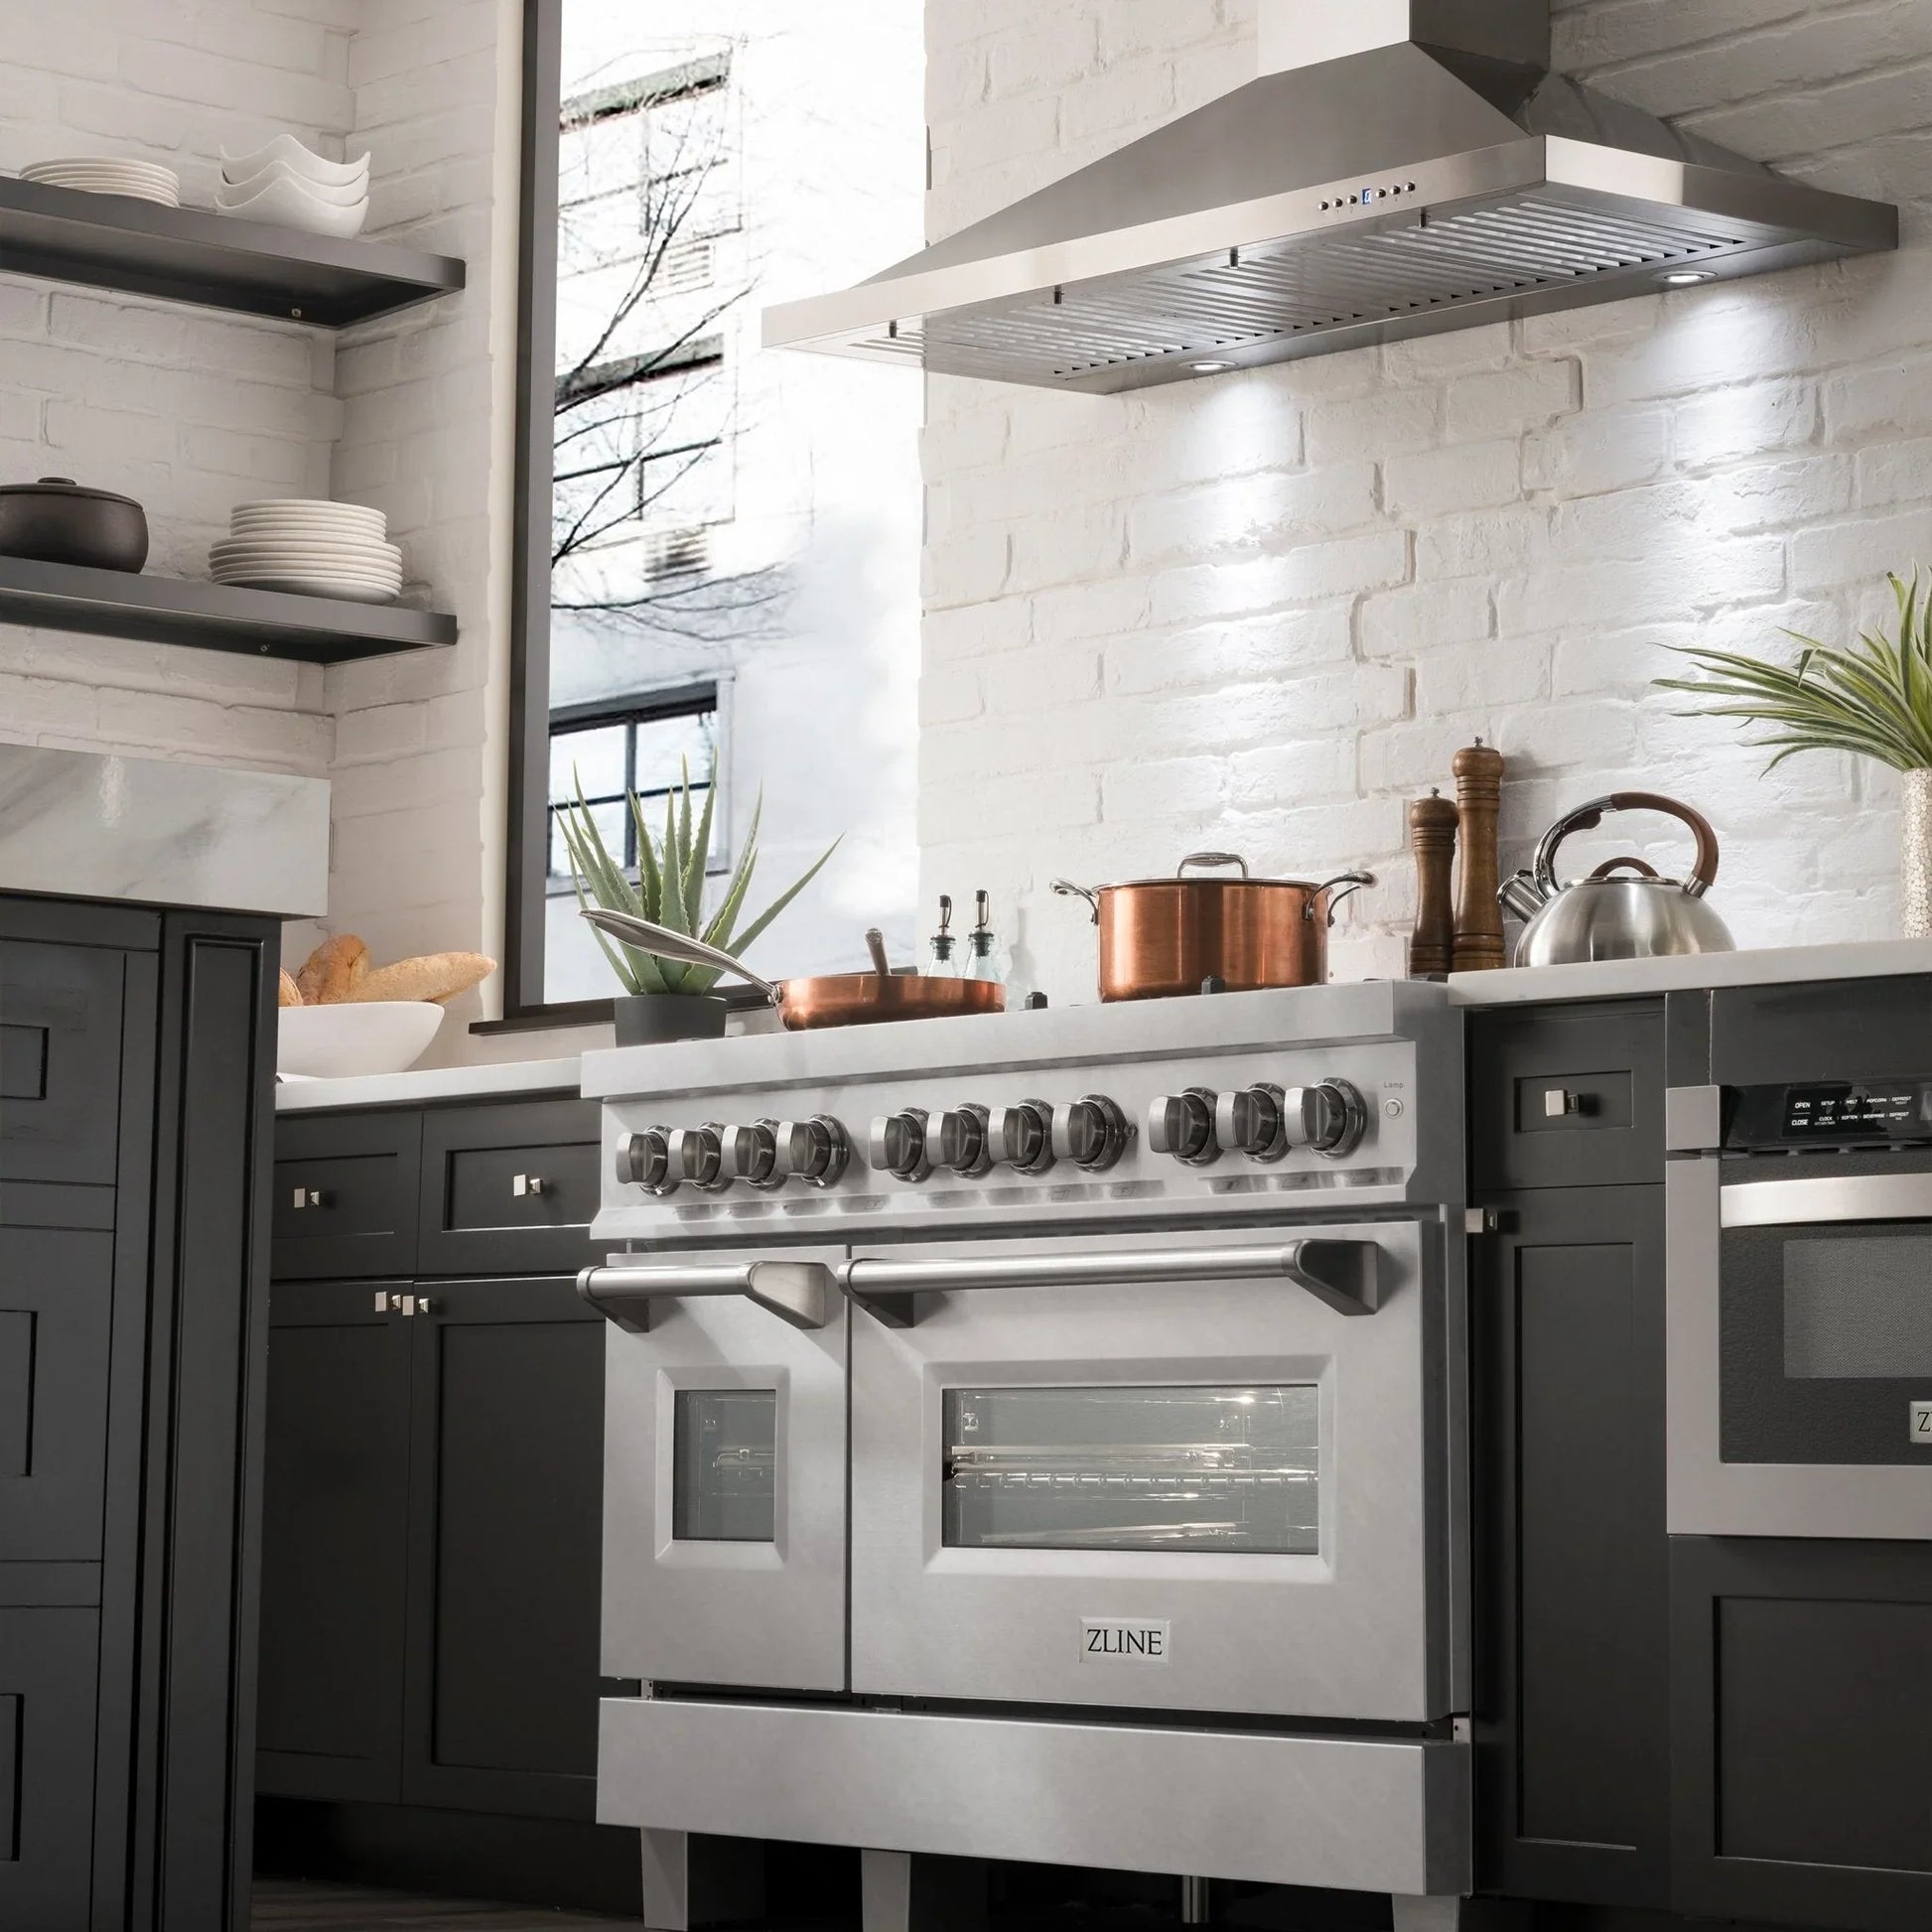 ZLINE 48" Dual Fuel Range with Gas Stove and Electric Oven - Fingerprint Resistant Stainless Steel